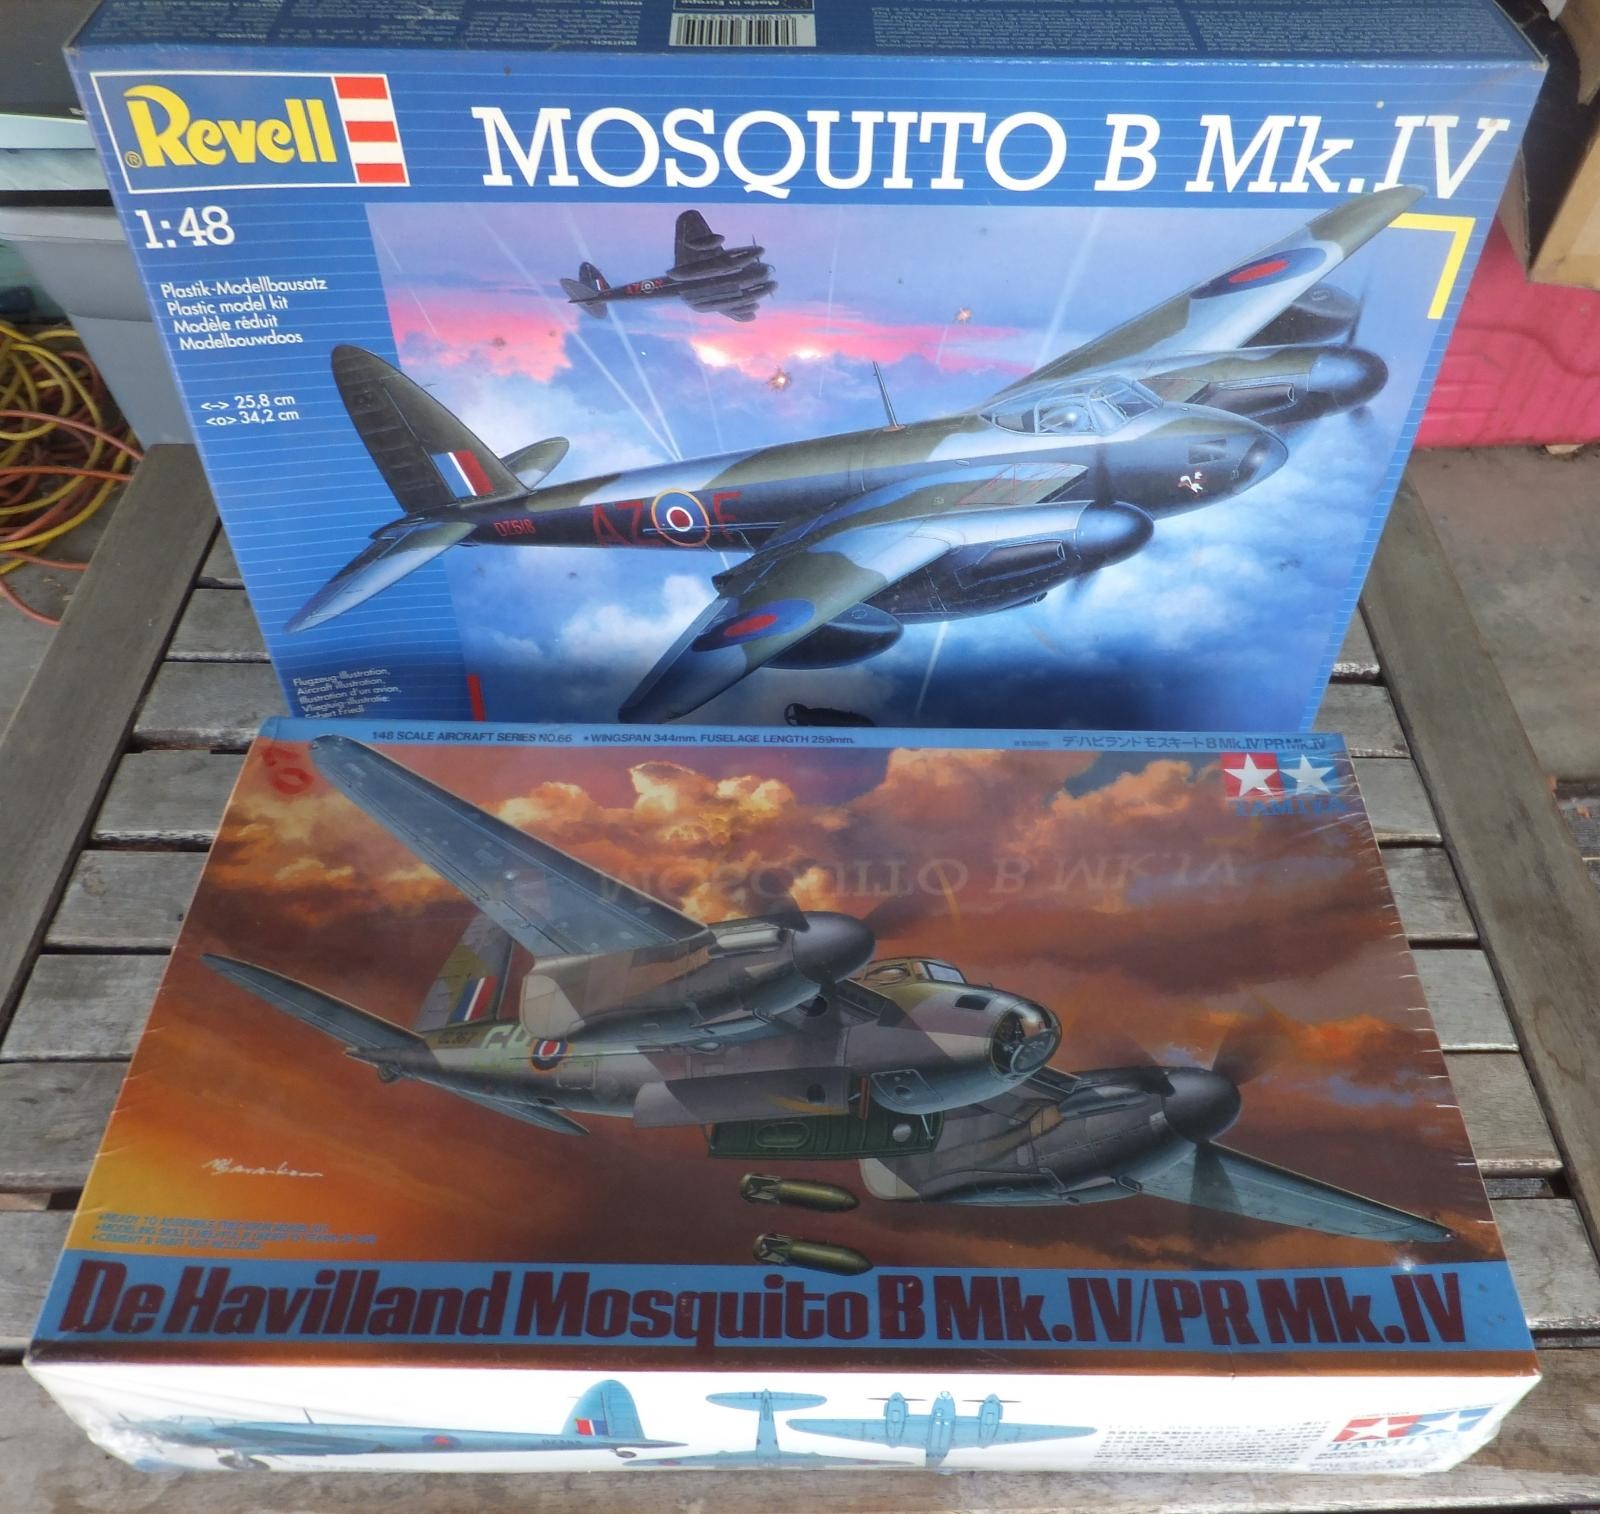 Dh Mosquito Bomber Model Kit 1:48 Scale Revell 03923